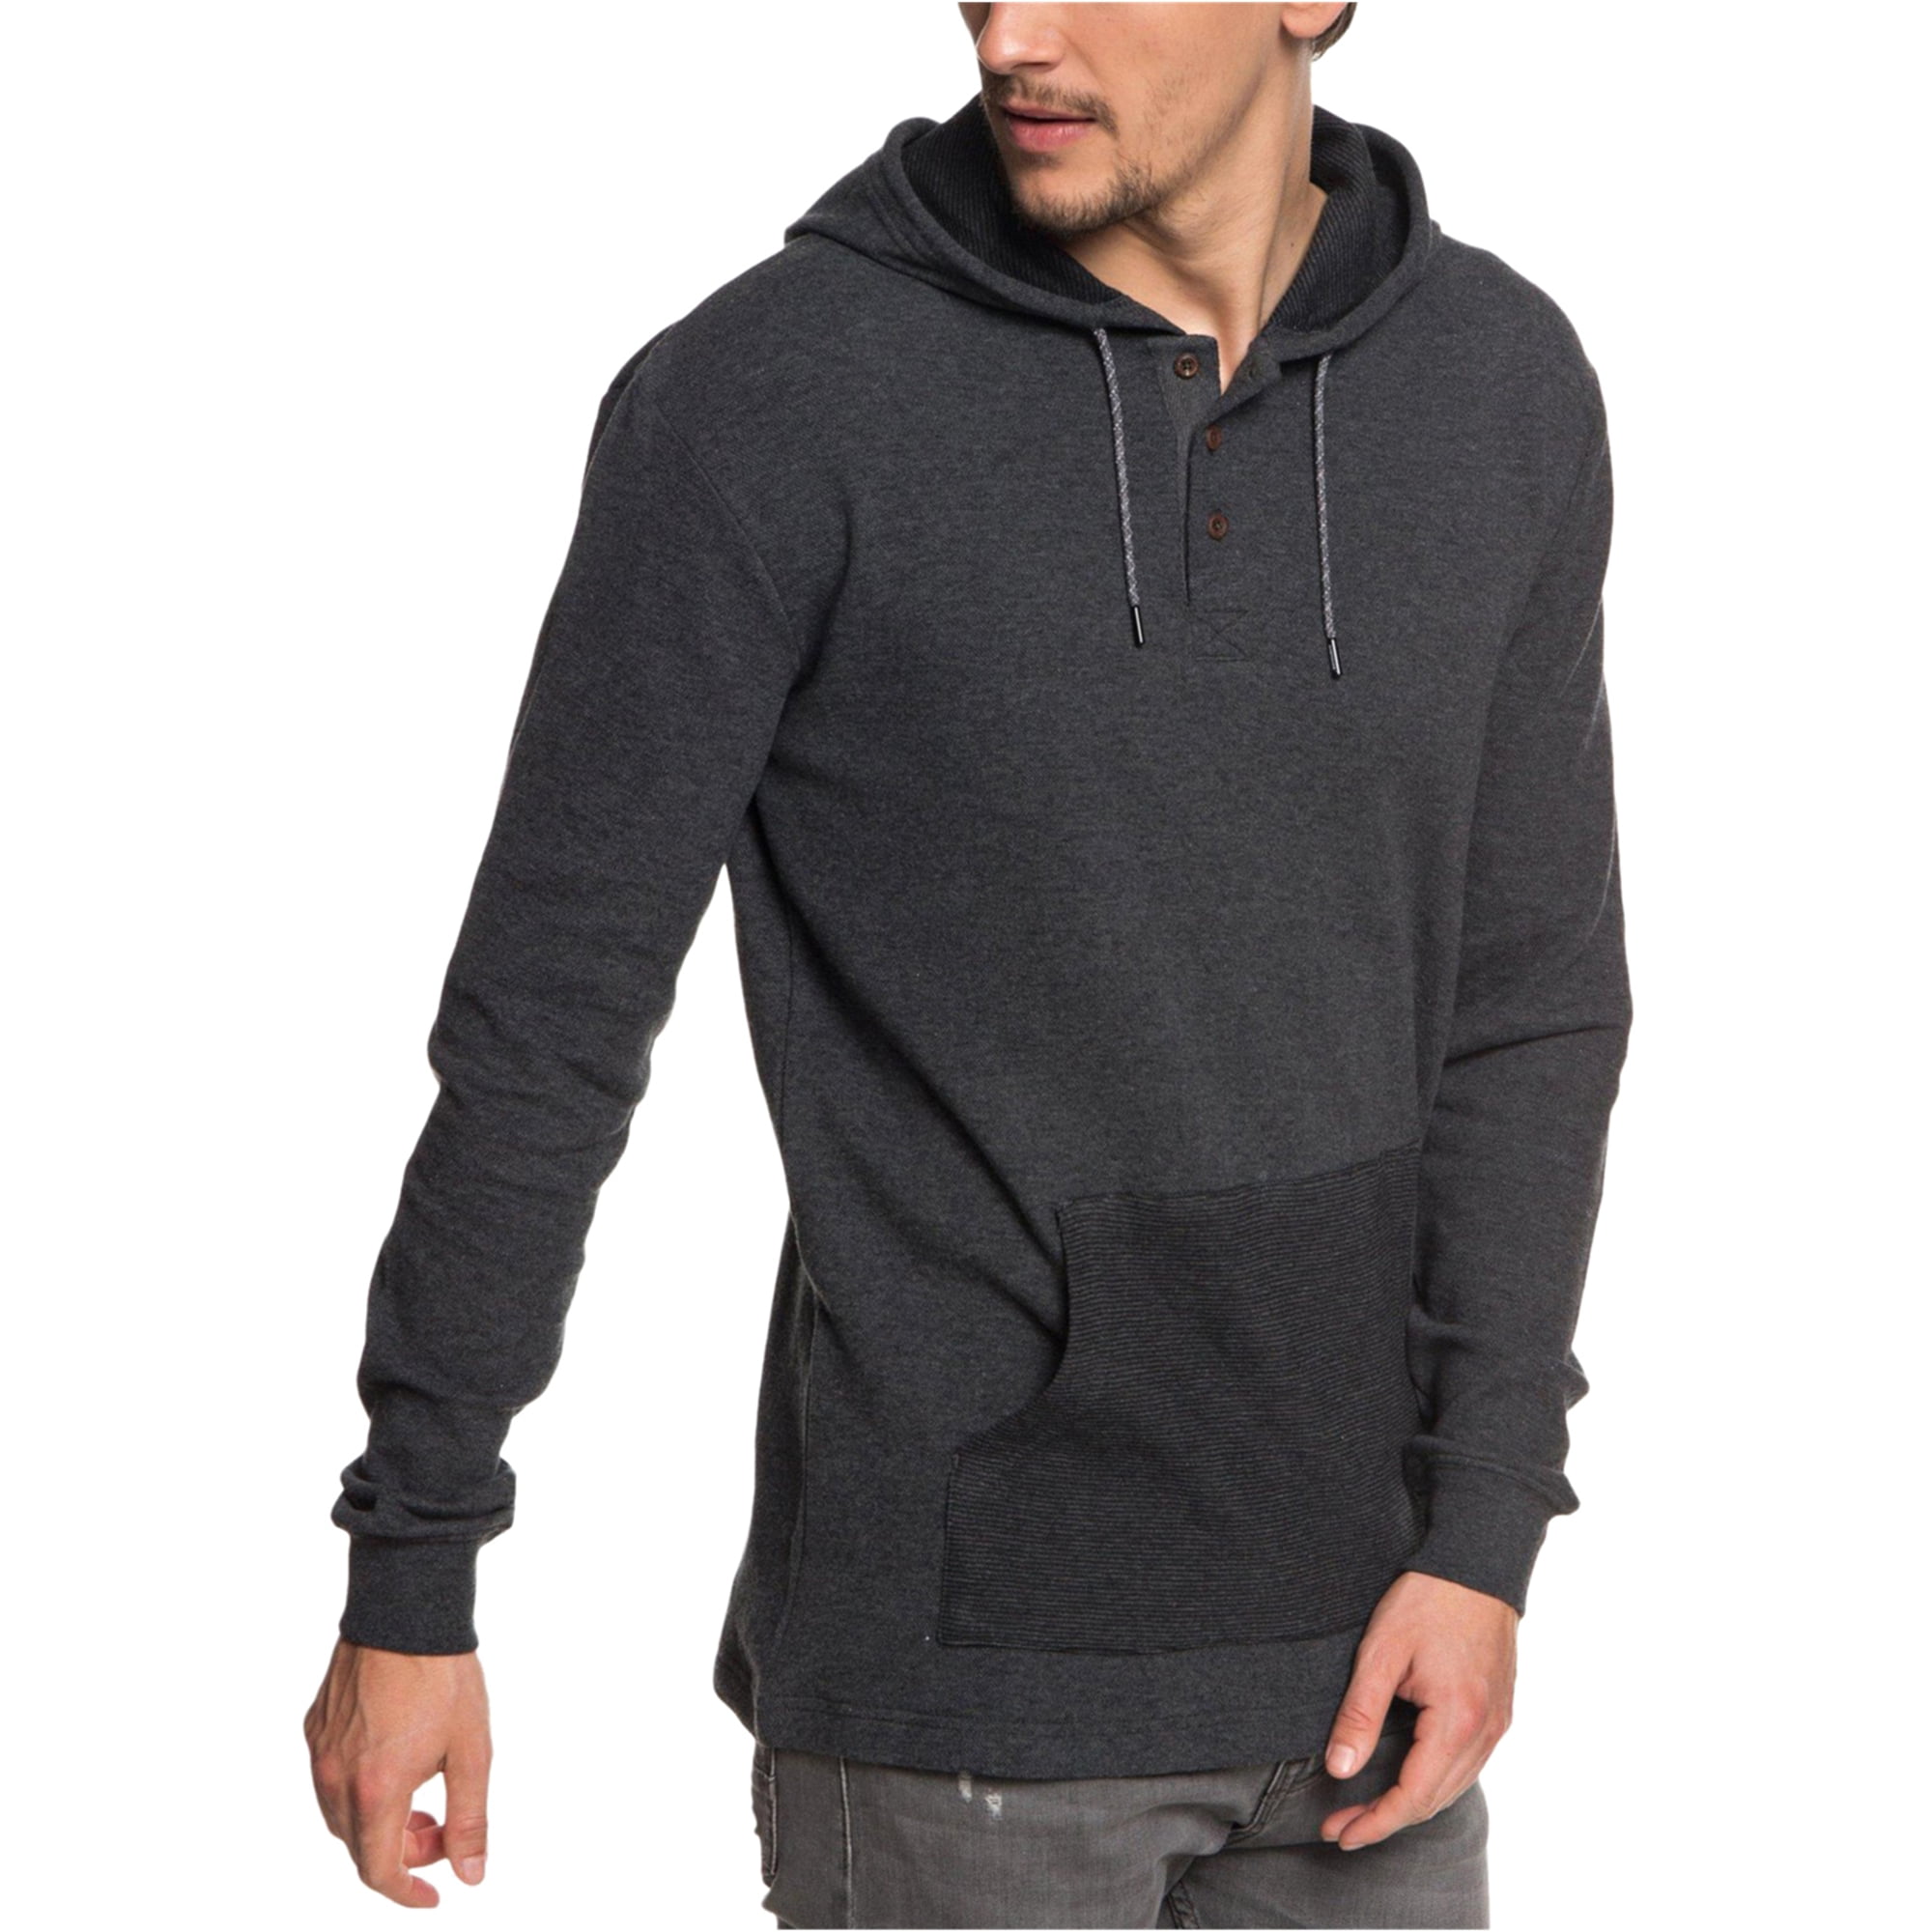 Quiksilver - Mens Sweaters Kangaroo-Pocket Hooded Pullover 2XL ...